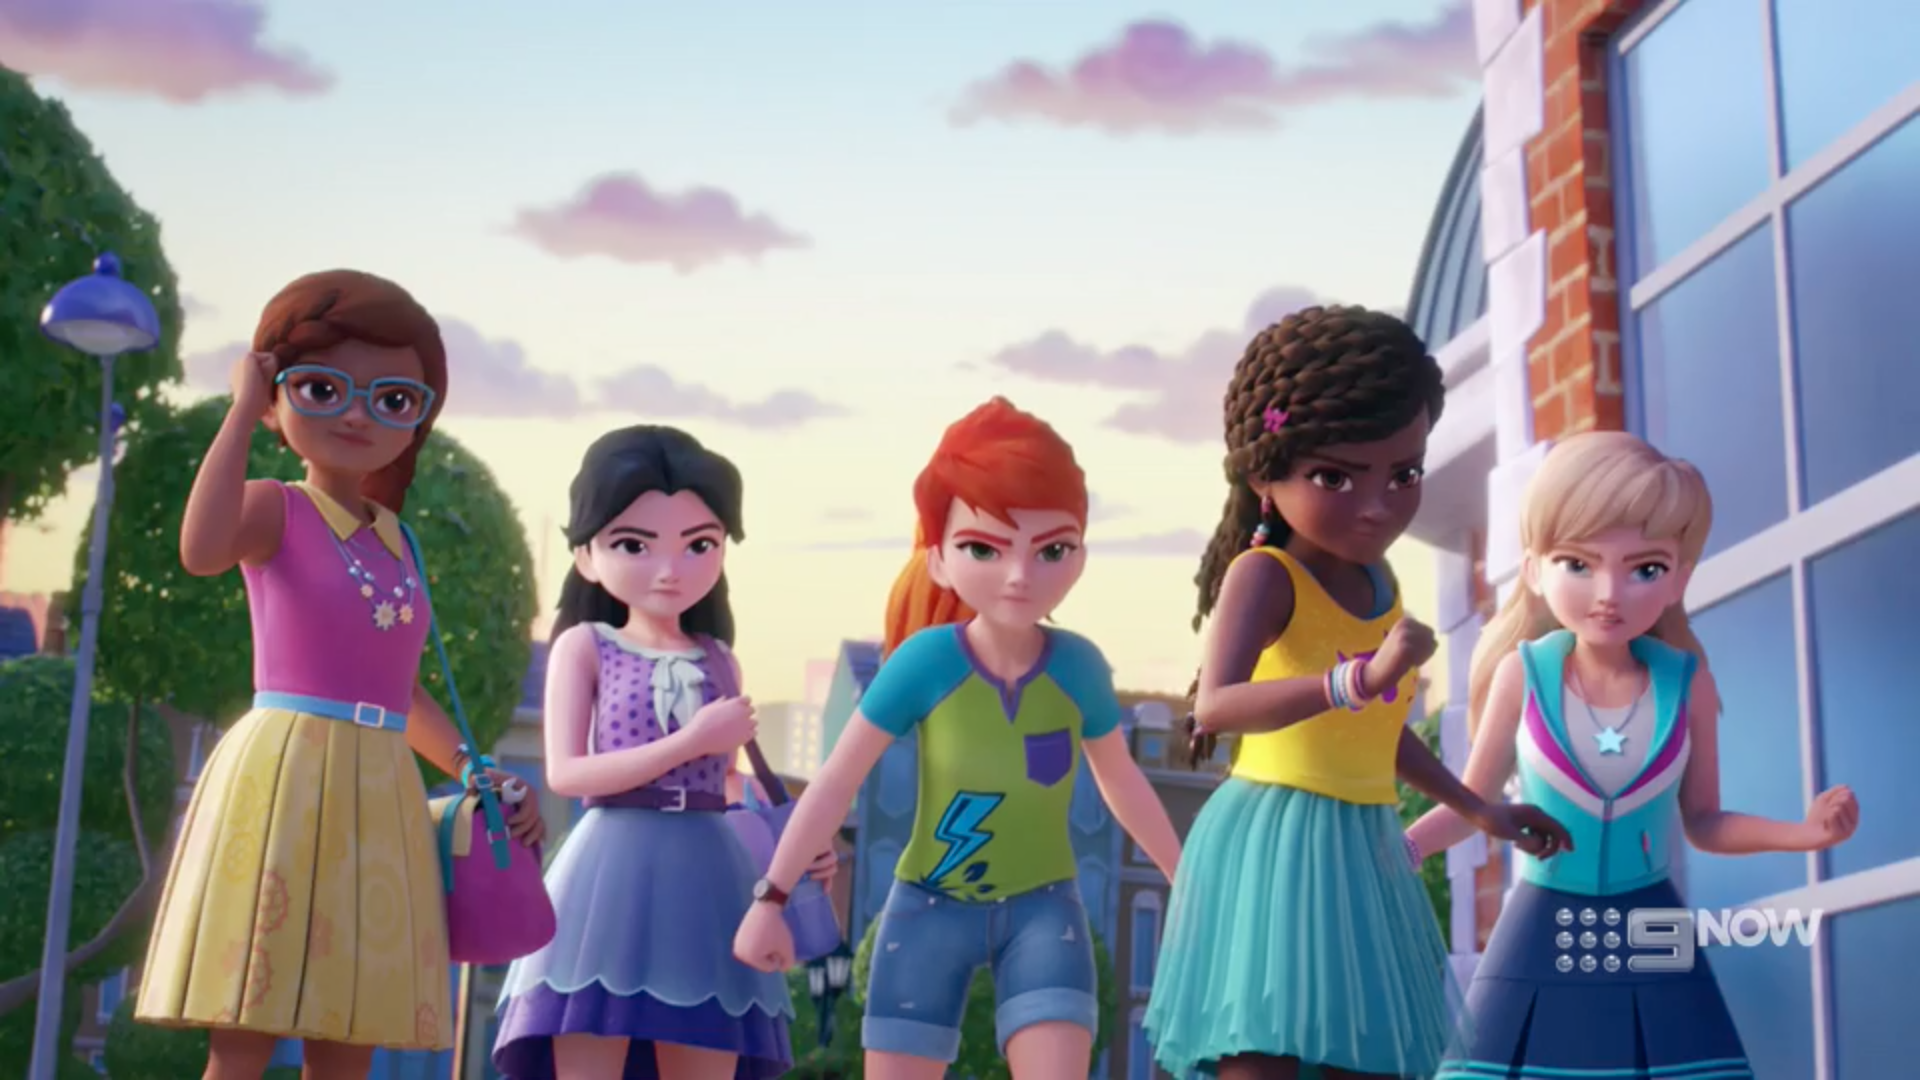 LEGO Friends 2018: Girls on a Mission, worthy reboot or not? - LEGO Media  and Gaming - Eurobricks Forums